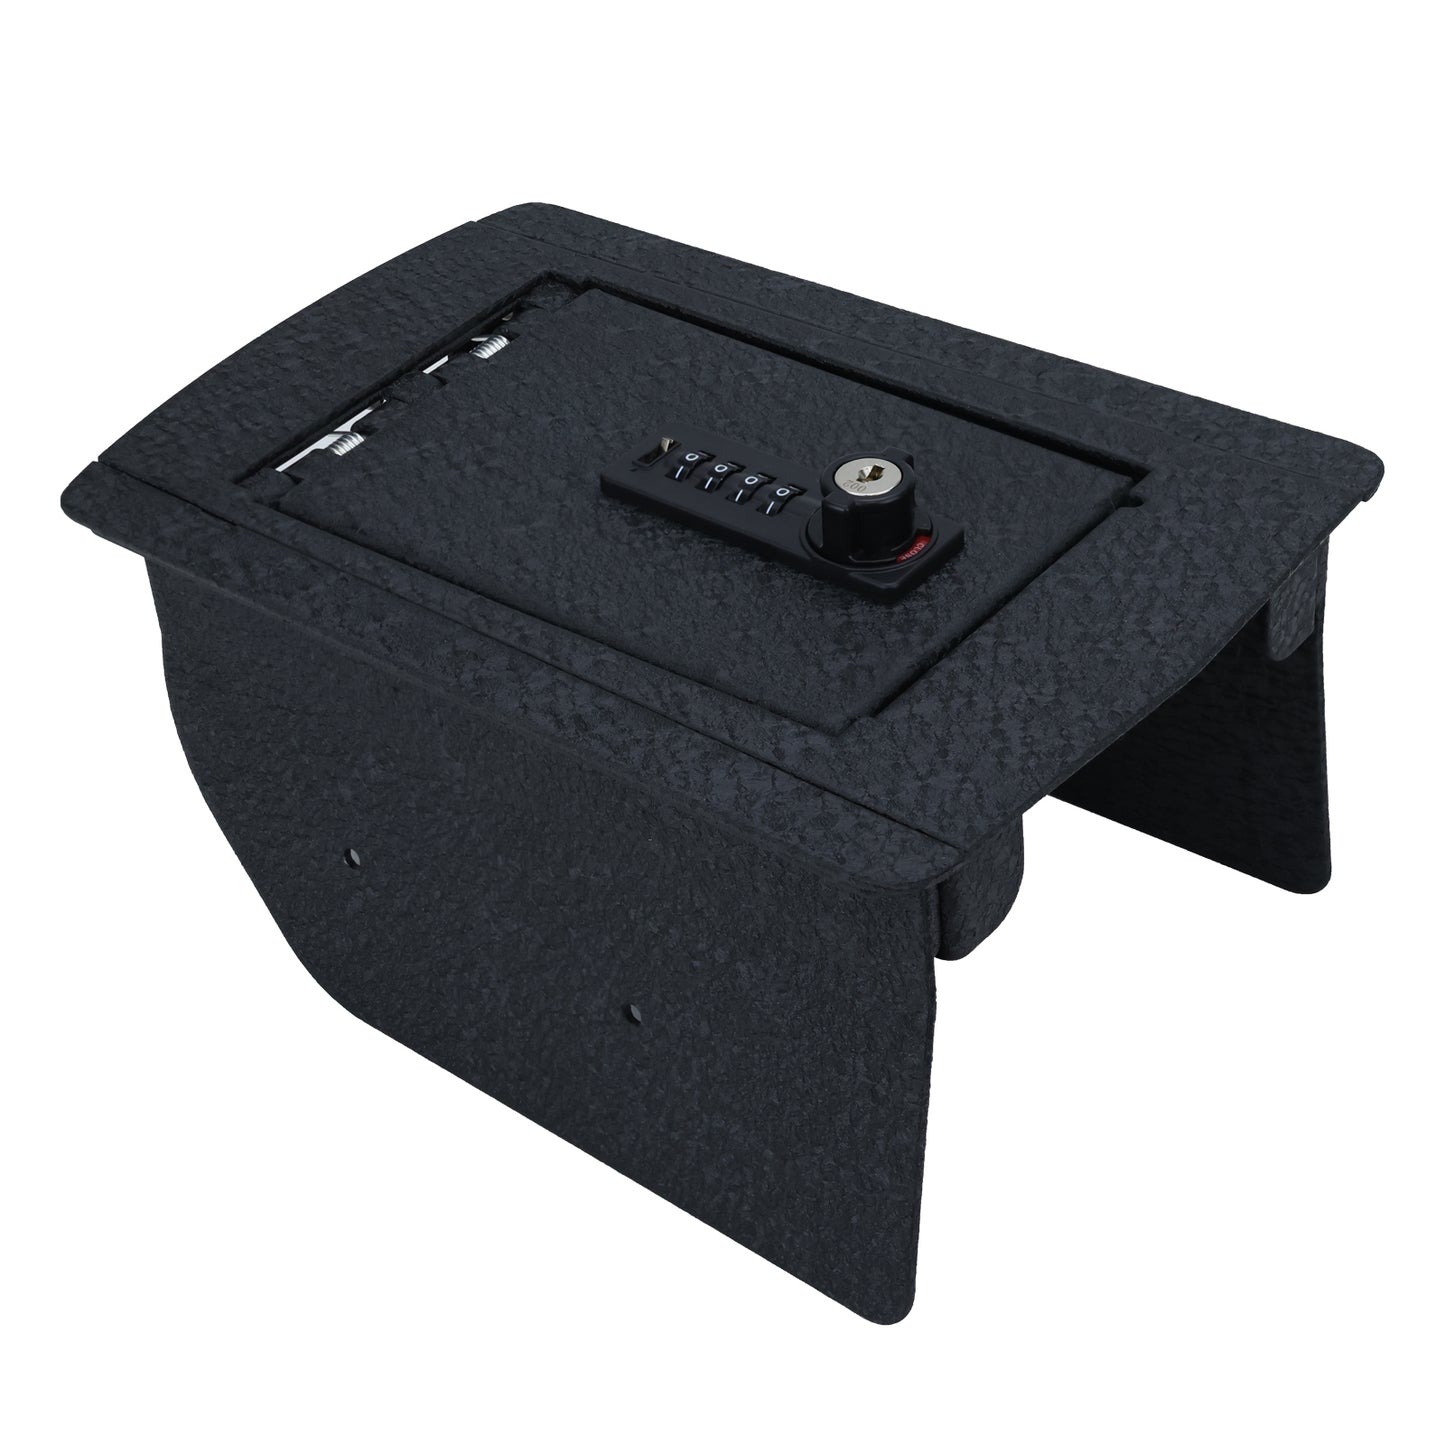 Center Console Safe Gun Safe for 2014-2020 Jeep Grand Cherokee and Dodge Durango, 4-Digit Combination Lock with Key